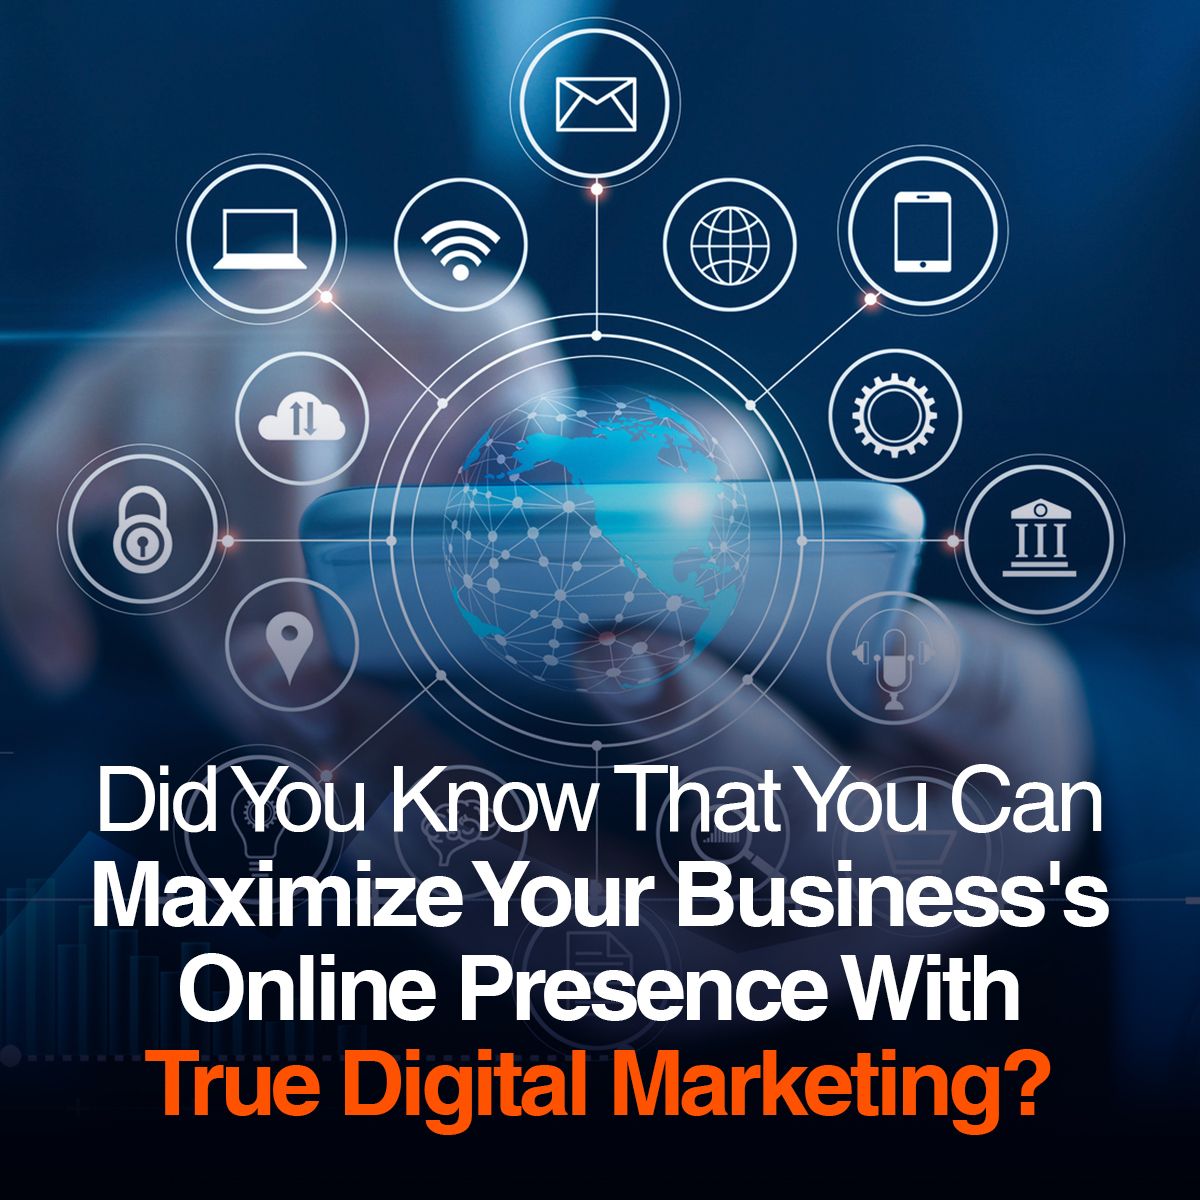 Did You Know That You Can Maximize Your Business Online Presence With True Digital Marketing?